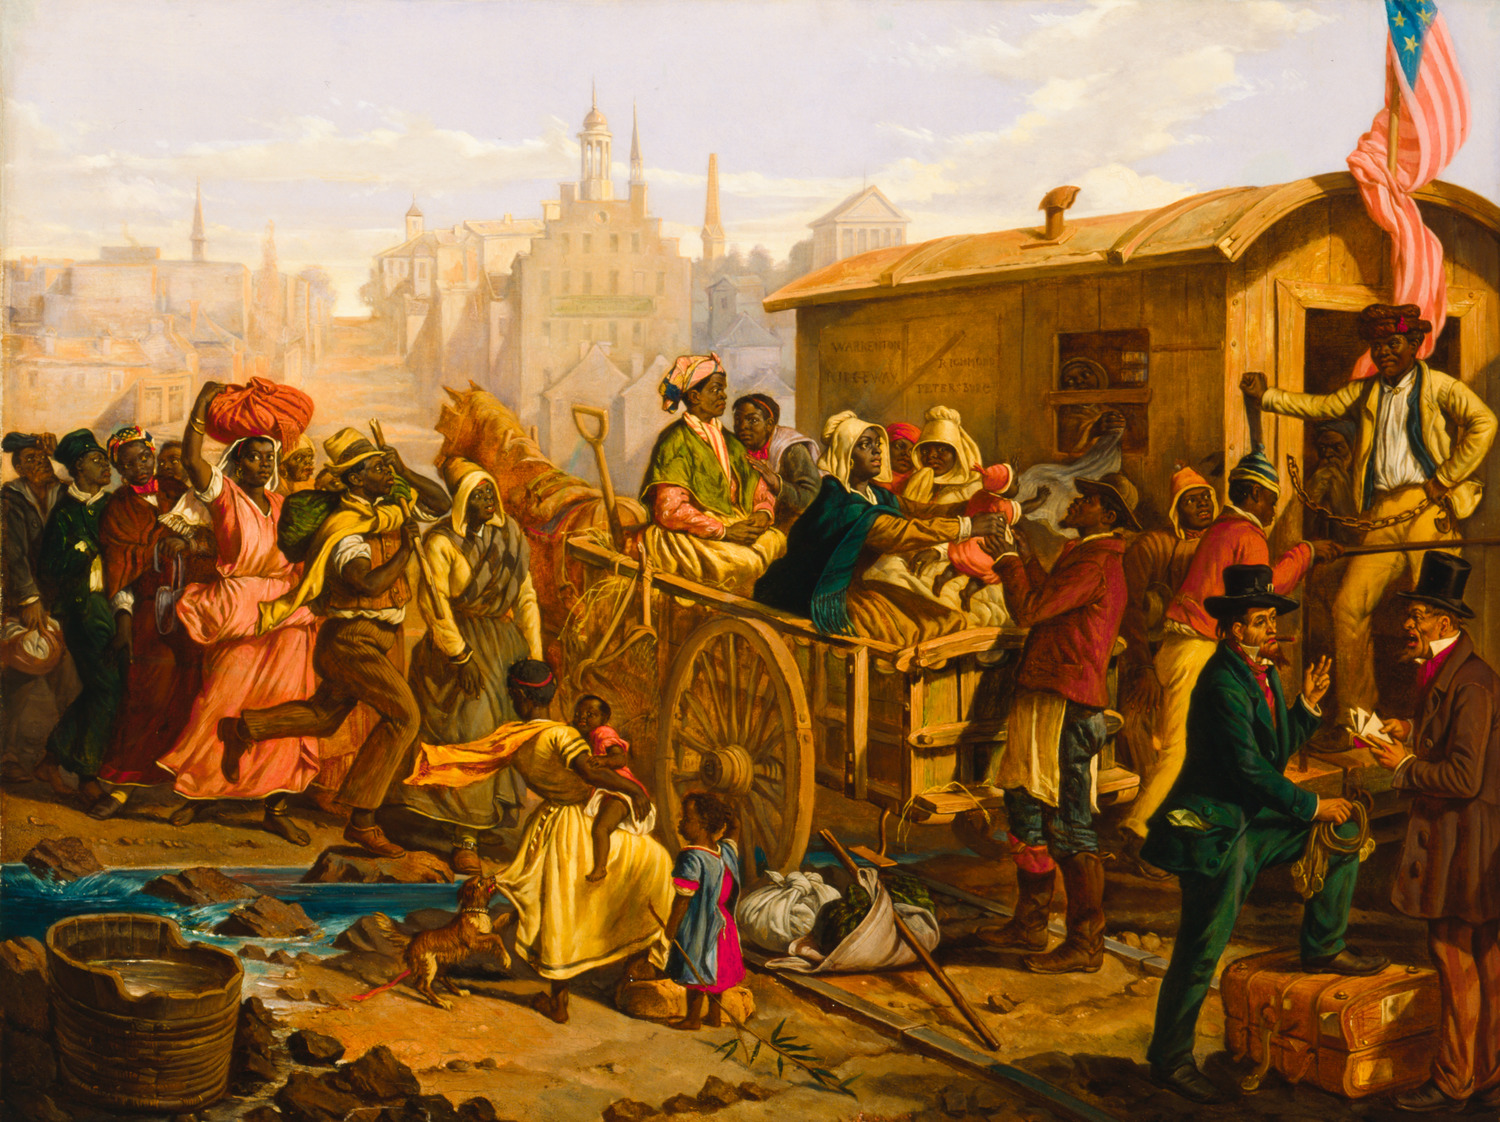 After the Sale: Slaves Going South from Richmond, oil painting by Eyre Crowe depicting crowded street scene on 8th Street, Richmond Virginia, 1853. ICHi-066786